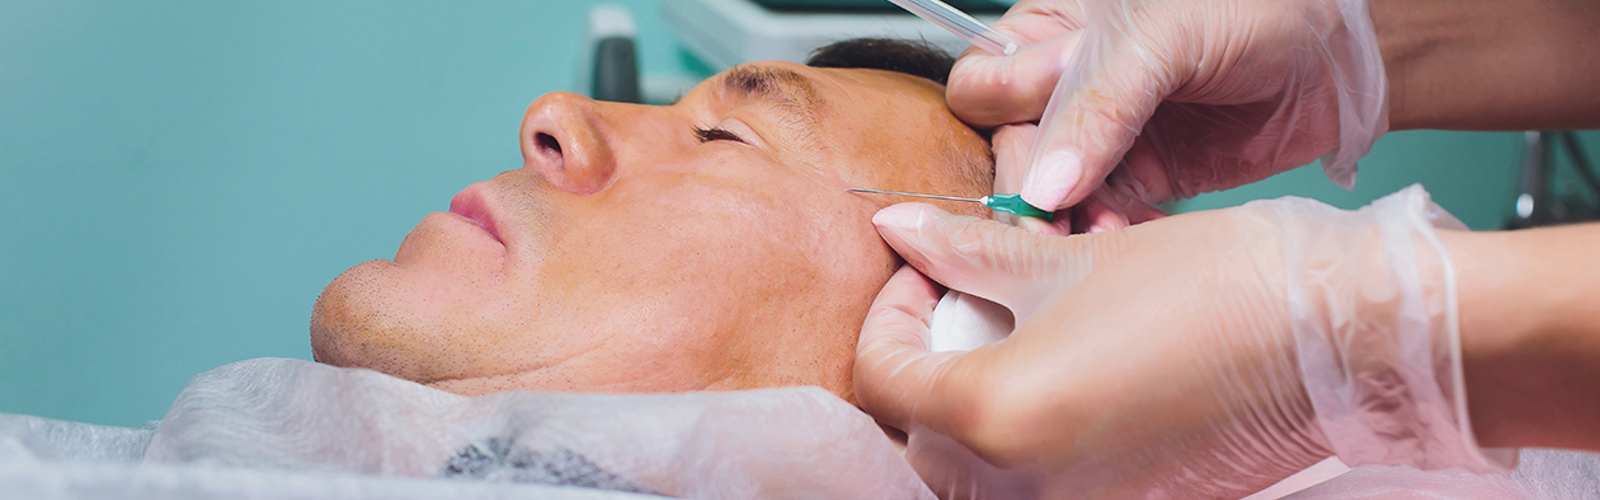 A person undergoing a cosmetic facial treatment